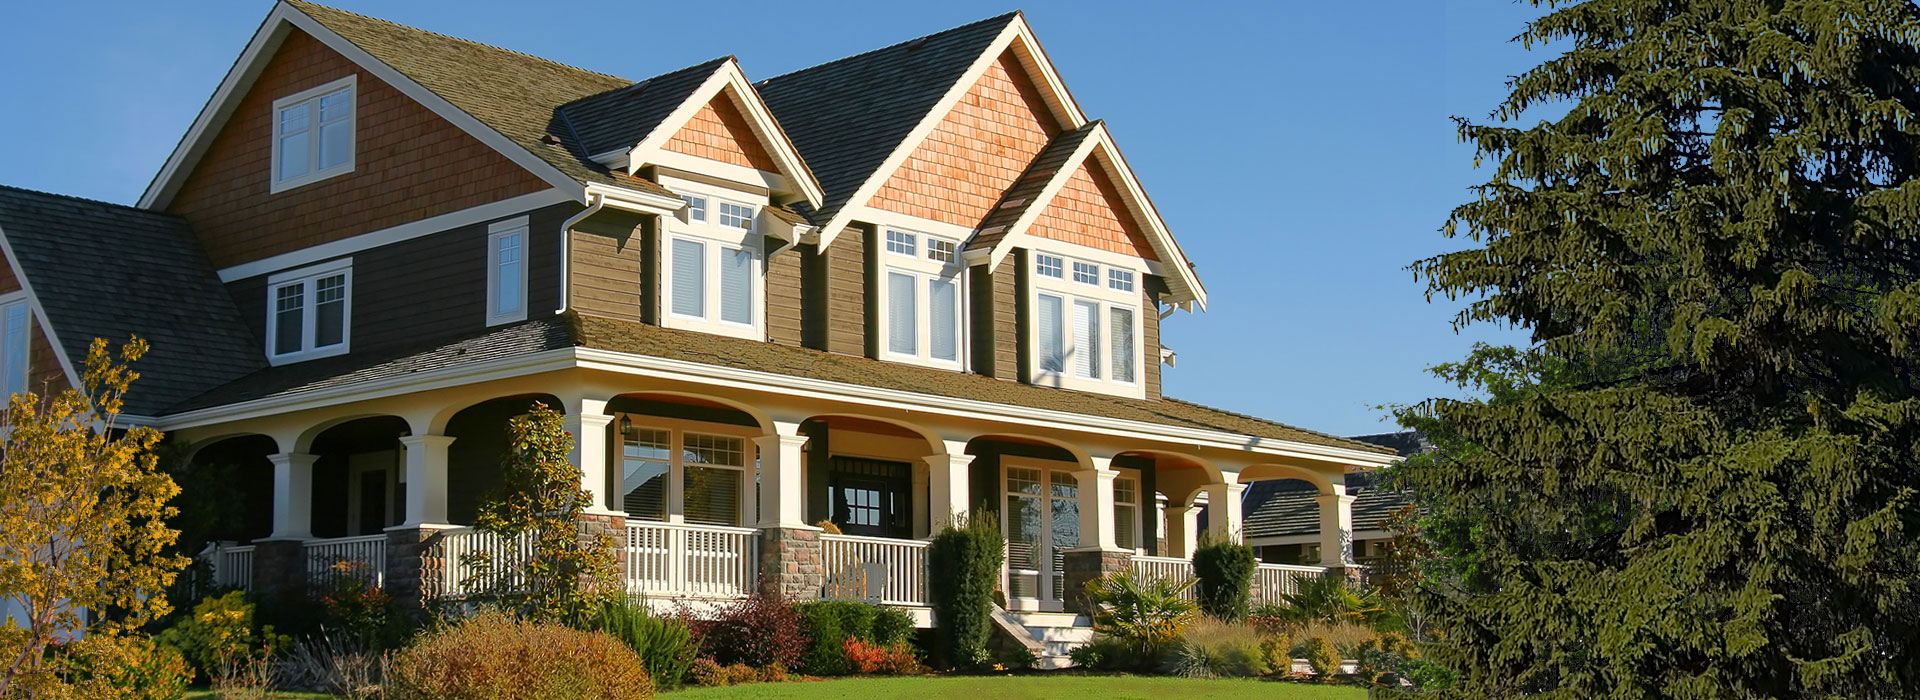 Rhode Island Real Estate Inspection Services